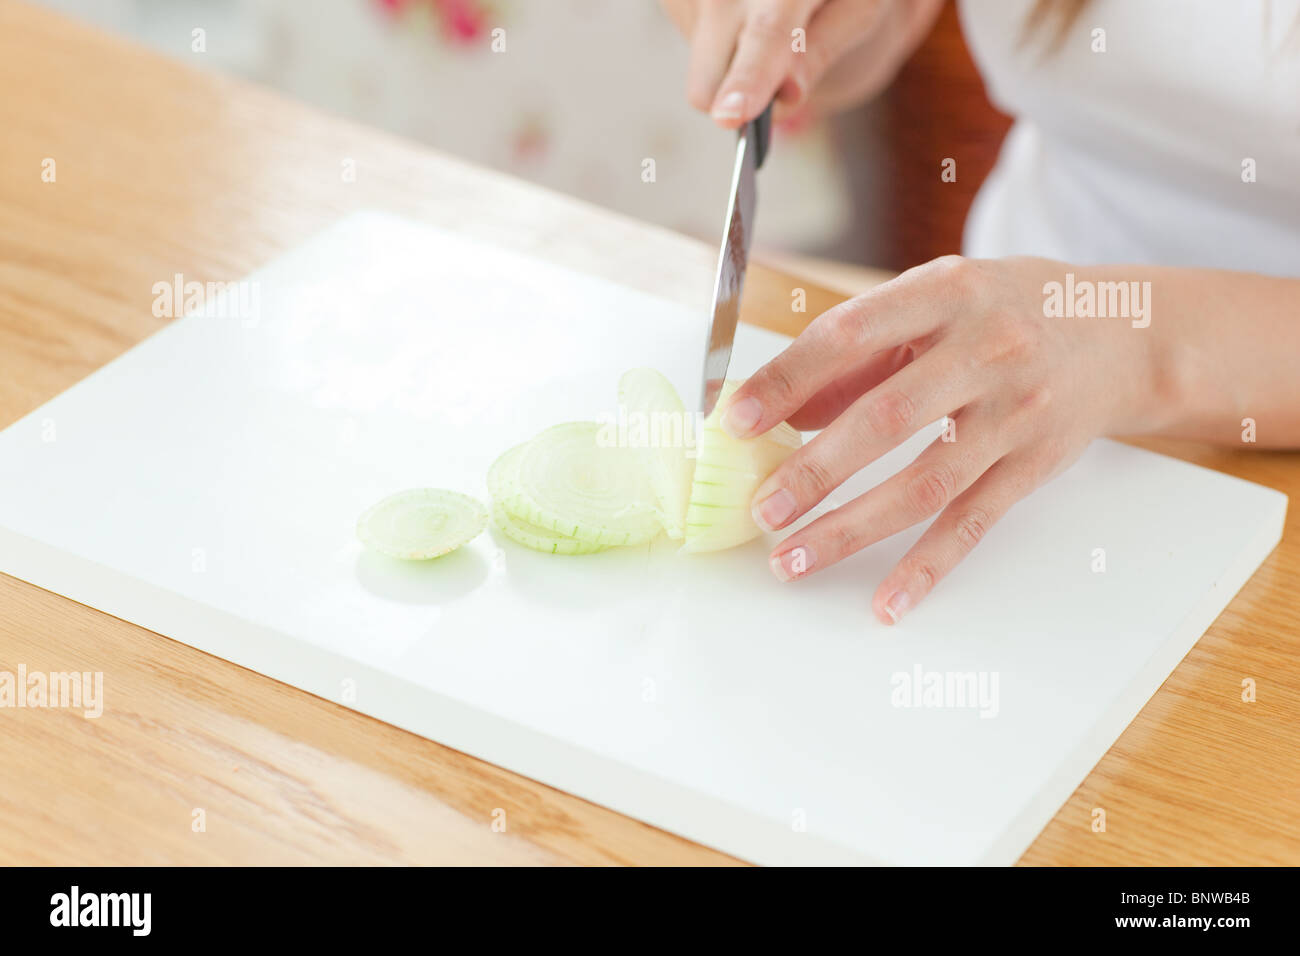 Delighted woman preparing oinion in the kitchen Stock Photo